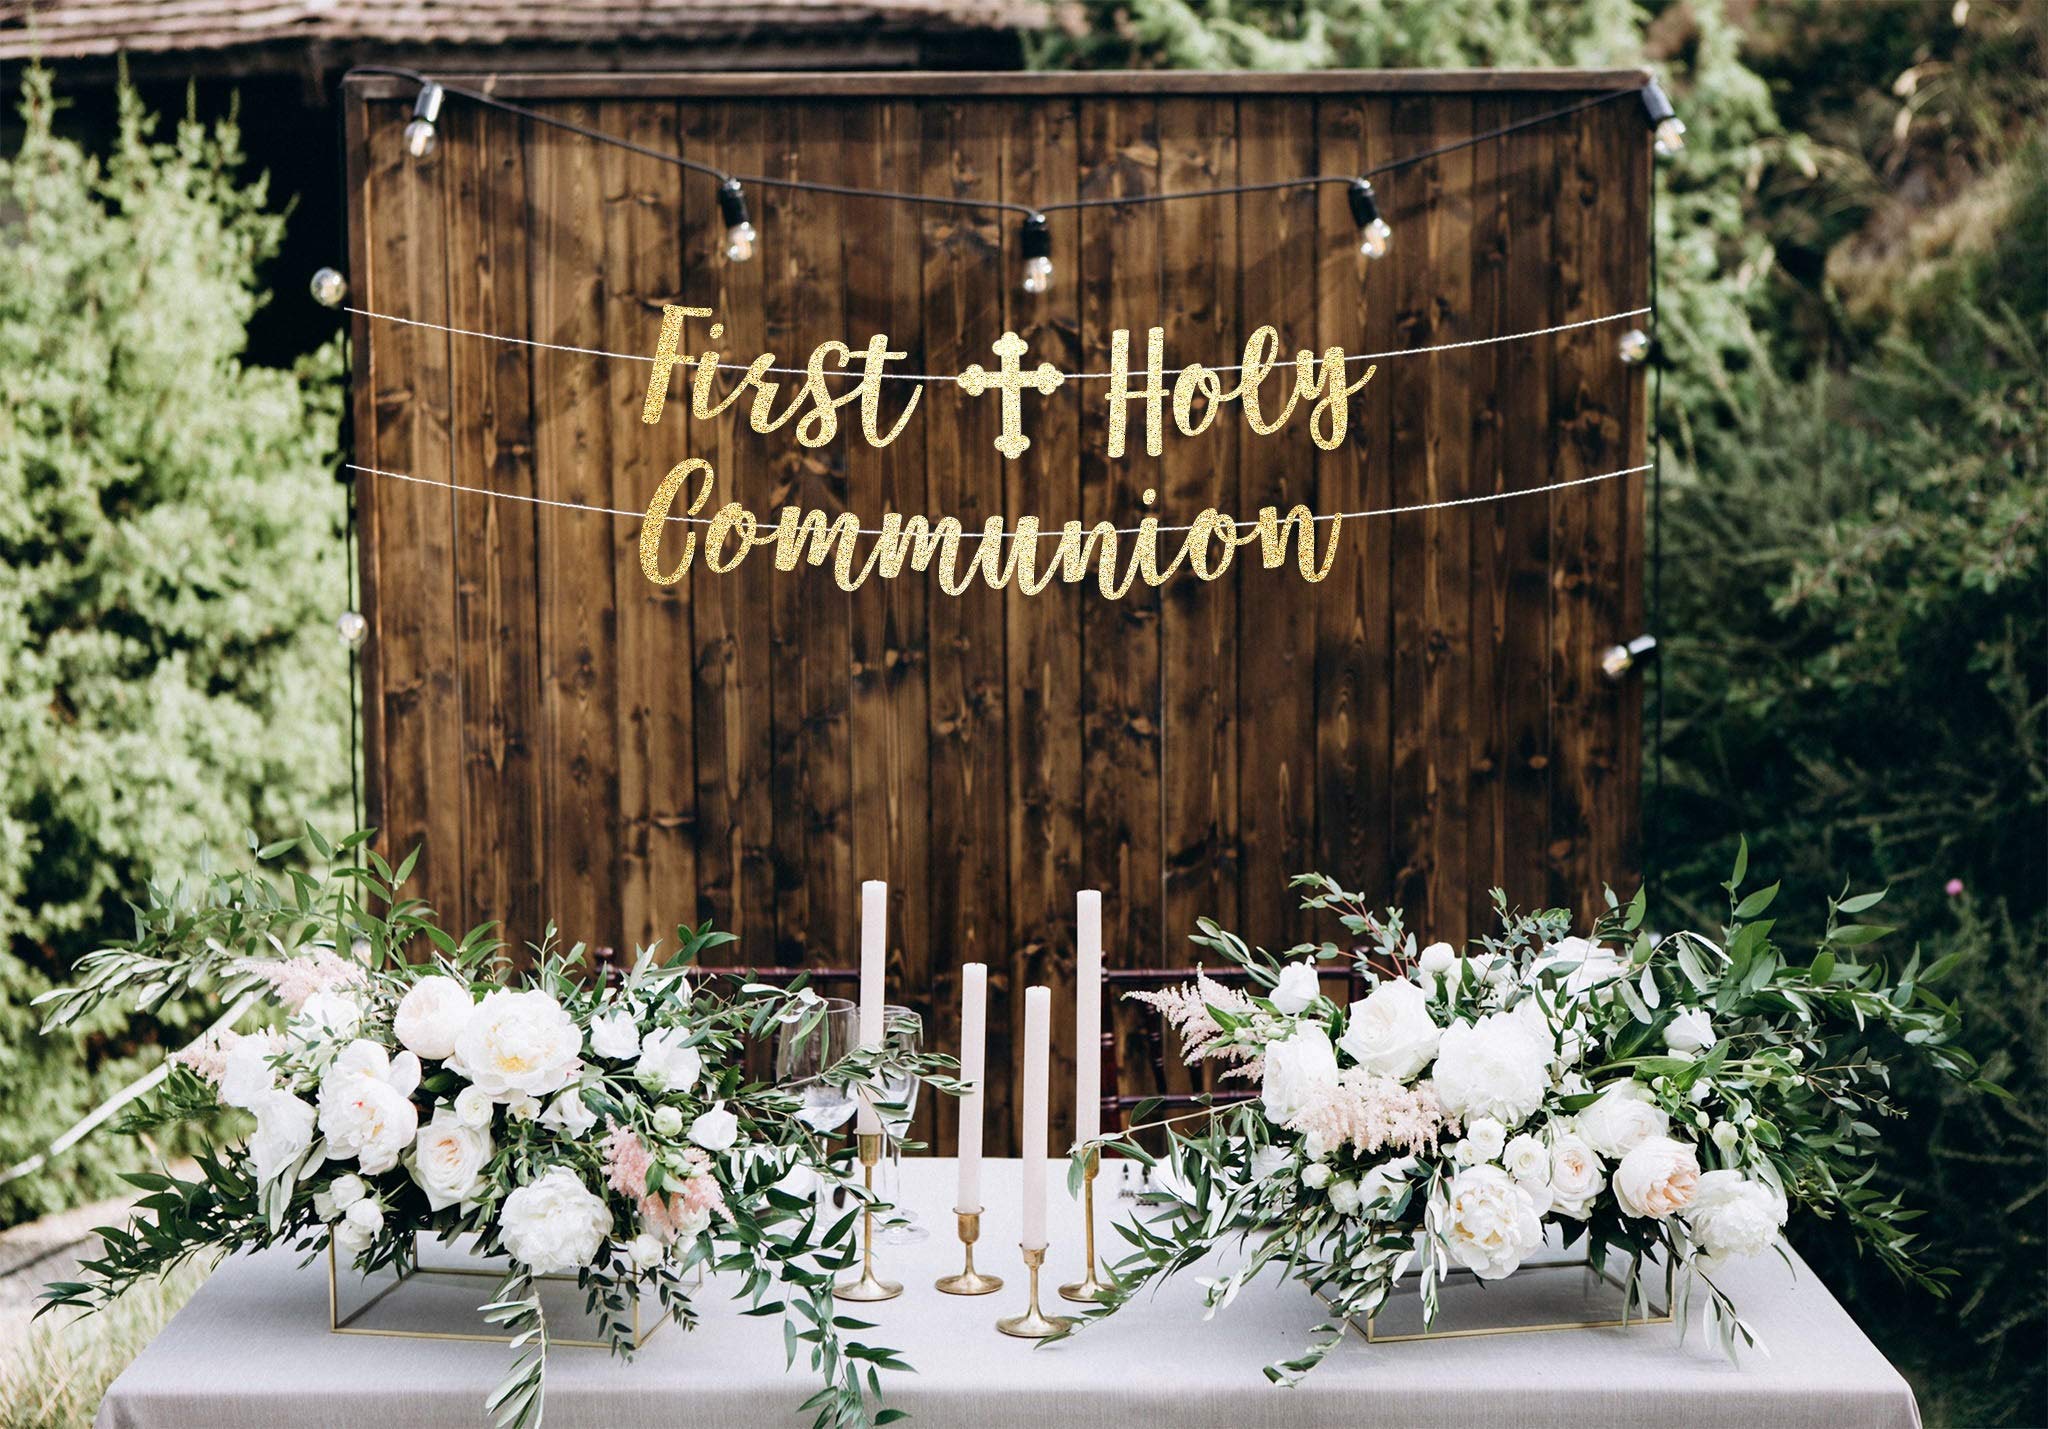 How to Celebrate Her First Holy Communion in 2022